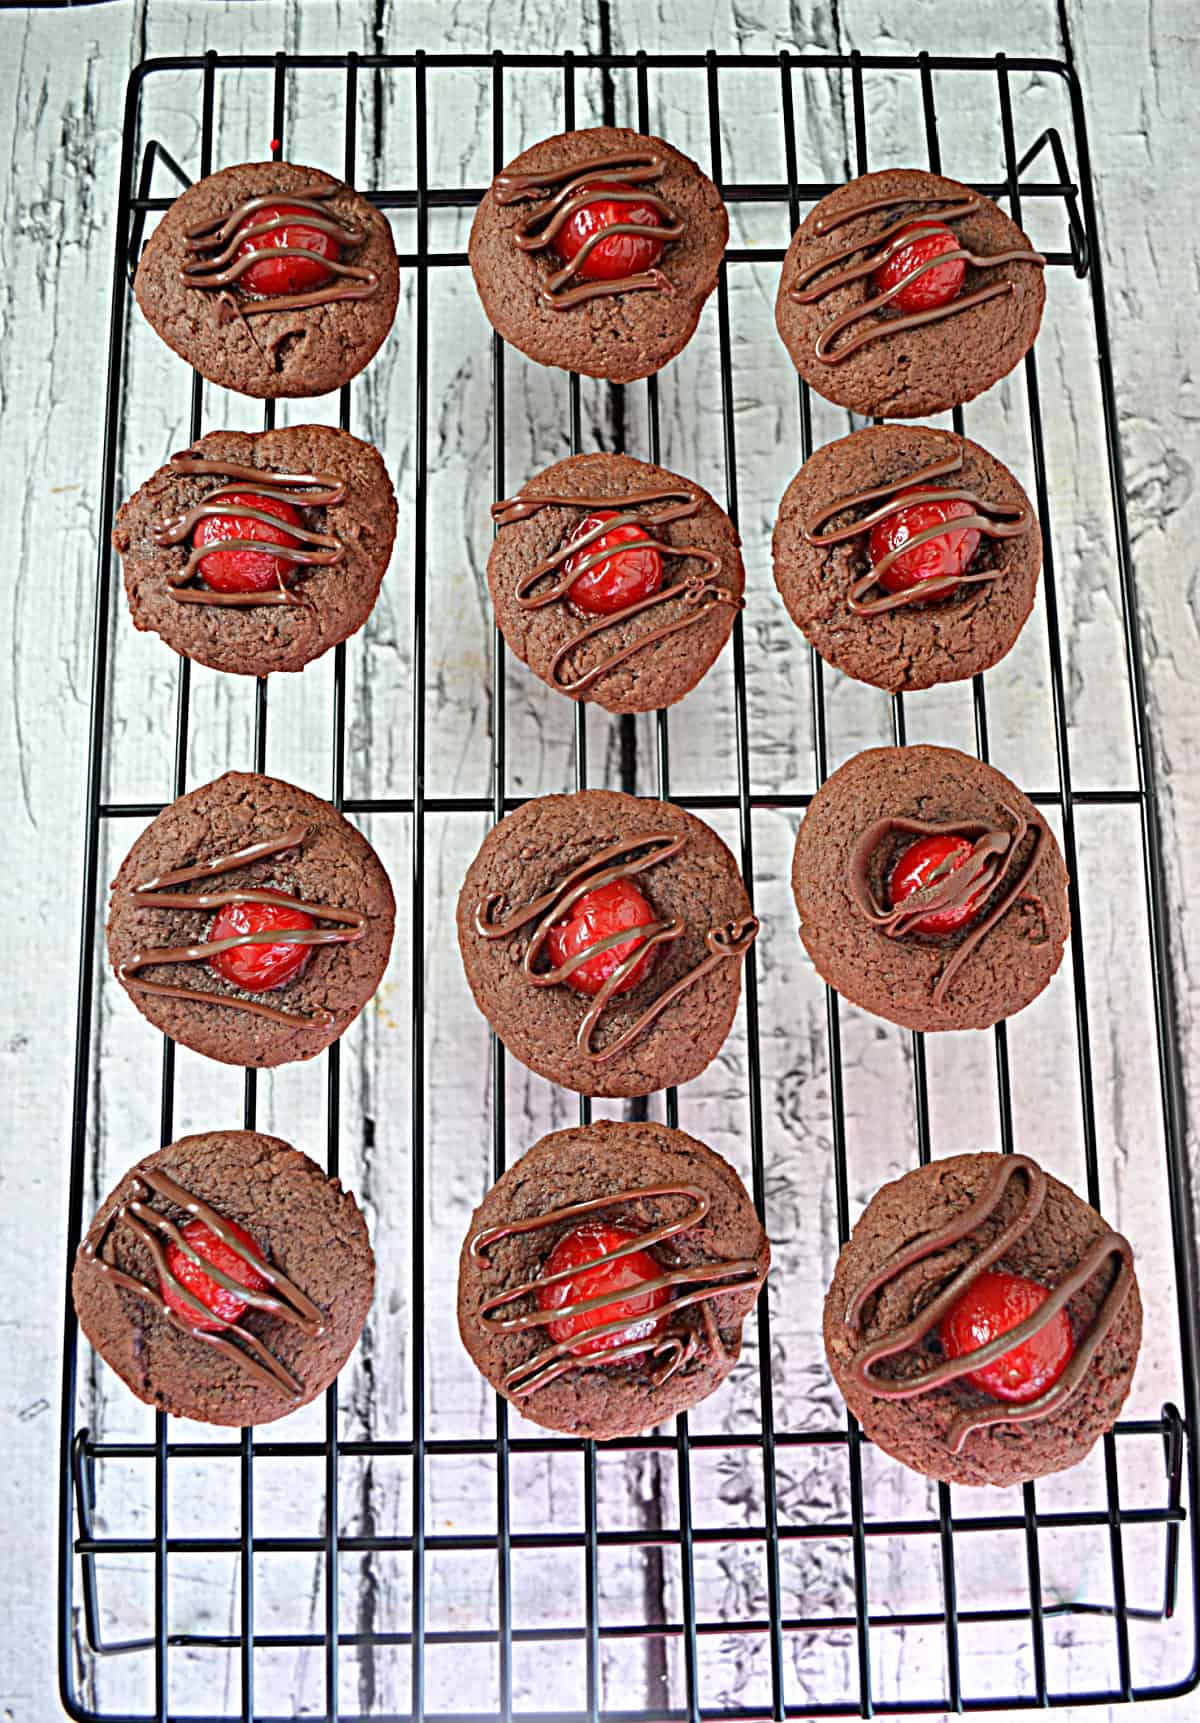 A baking rack holding 12 chocolate covered cherry thumbprint cookies